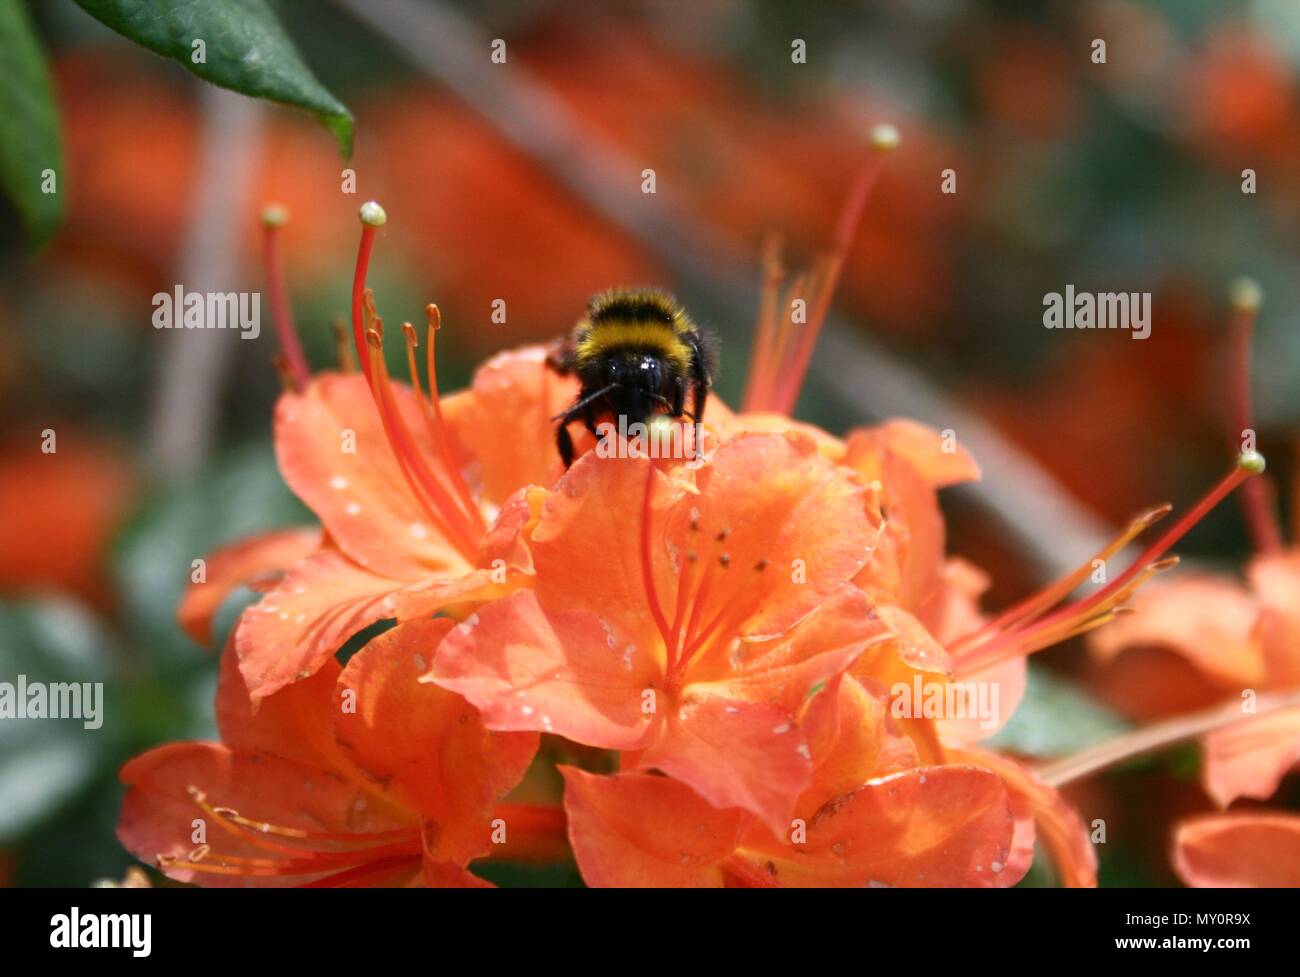 Bombus collects nectar and pollen on an orange azalea on a blur background, close up Stock Photo